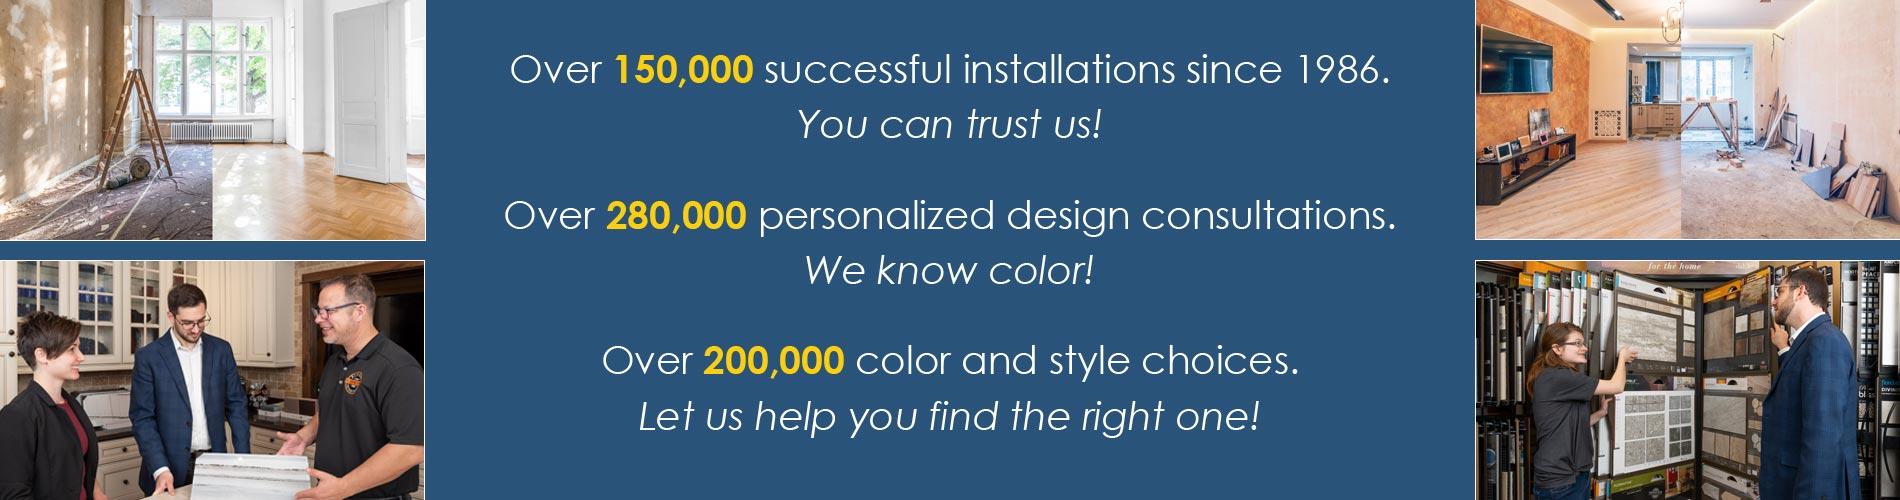 Over 200,000 color and style choices.  Let us help you find the right one!  Over 280,000 personalized design consultations.  We know color!  Over 150,000 successful installations since 1986.  You can trust us!